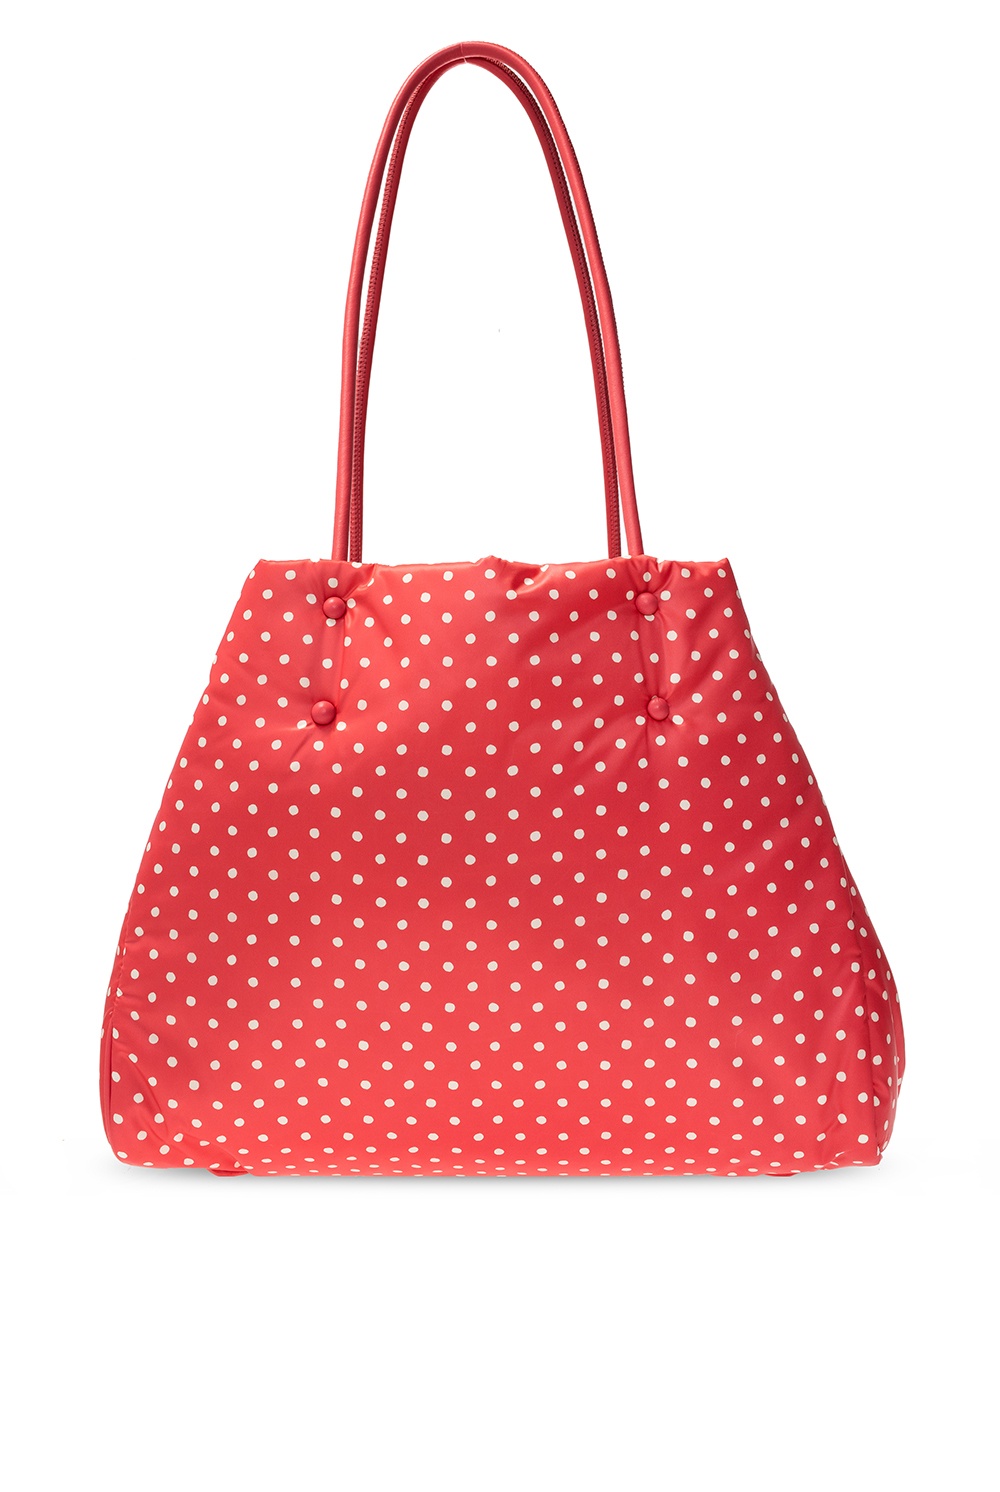 Amazon.com: kate spade new york Resuable Shopping Tote, Black Dots : Home &  Kitchen